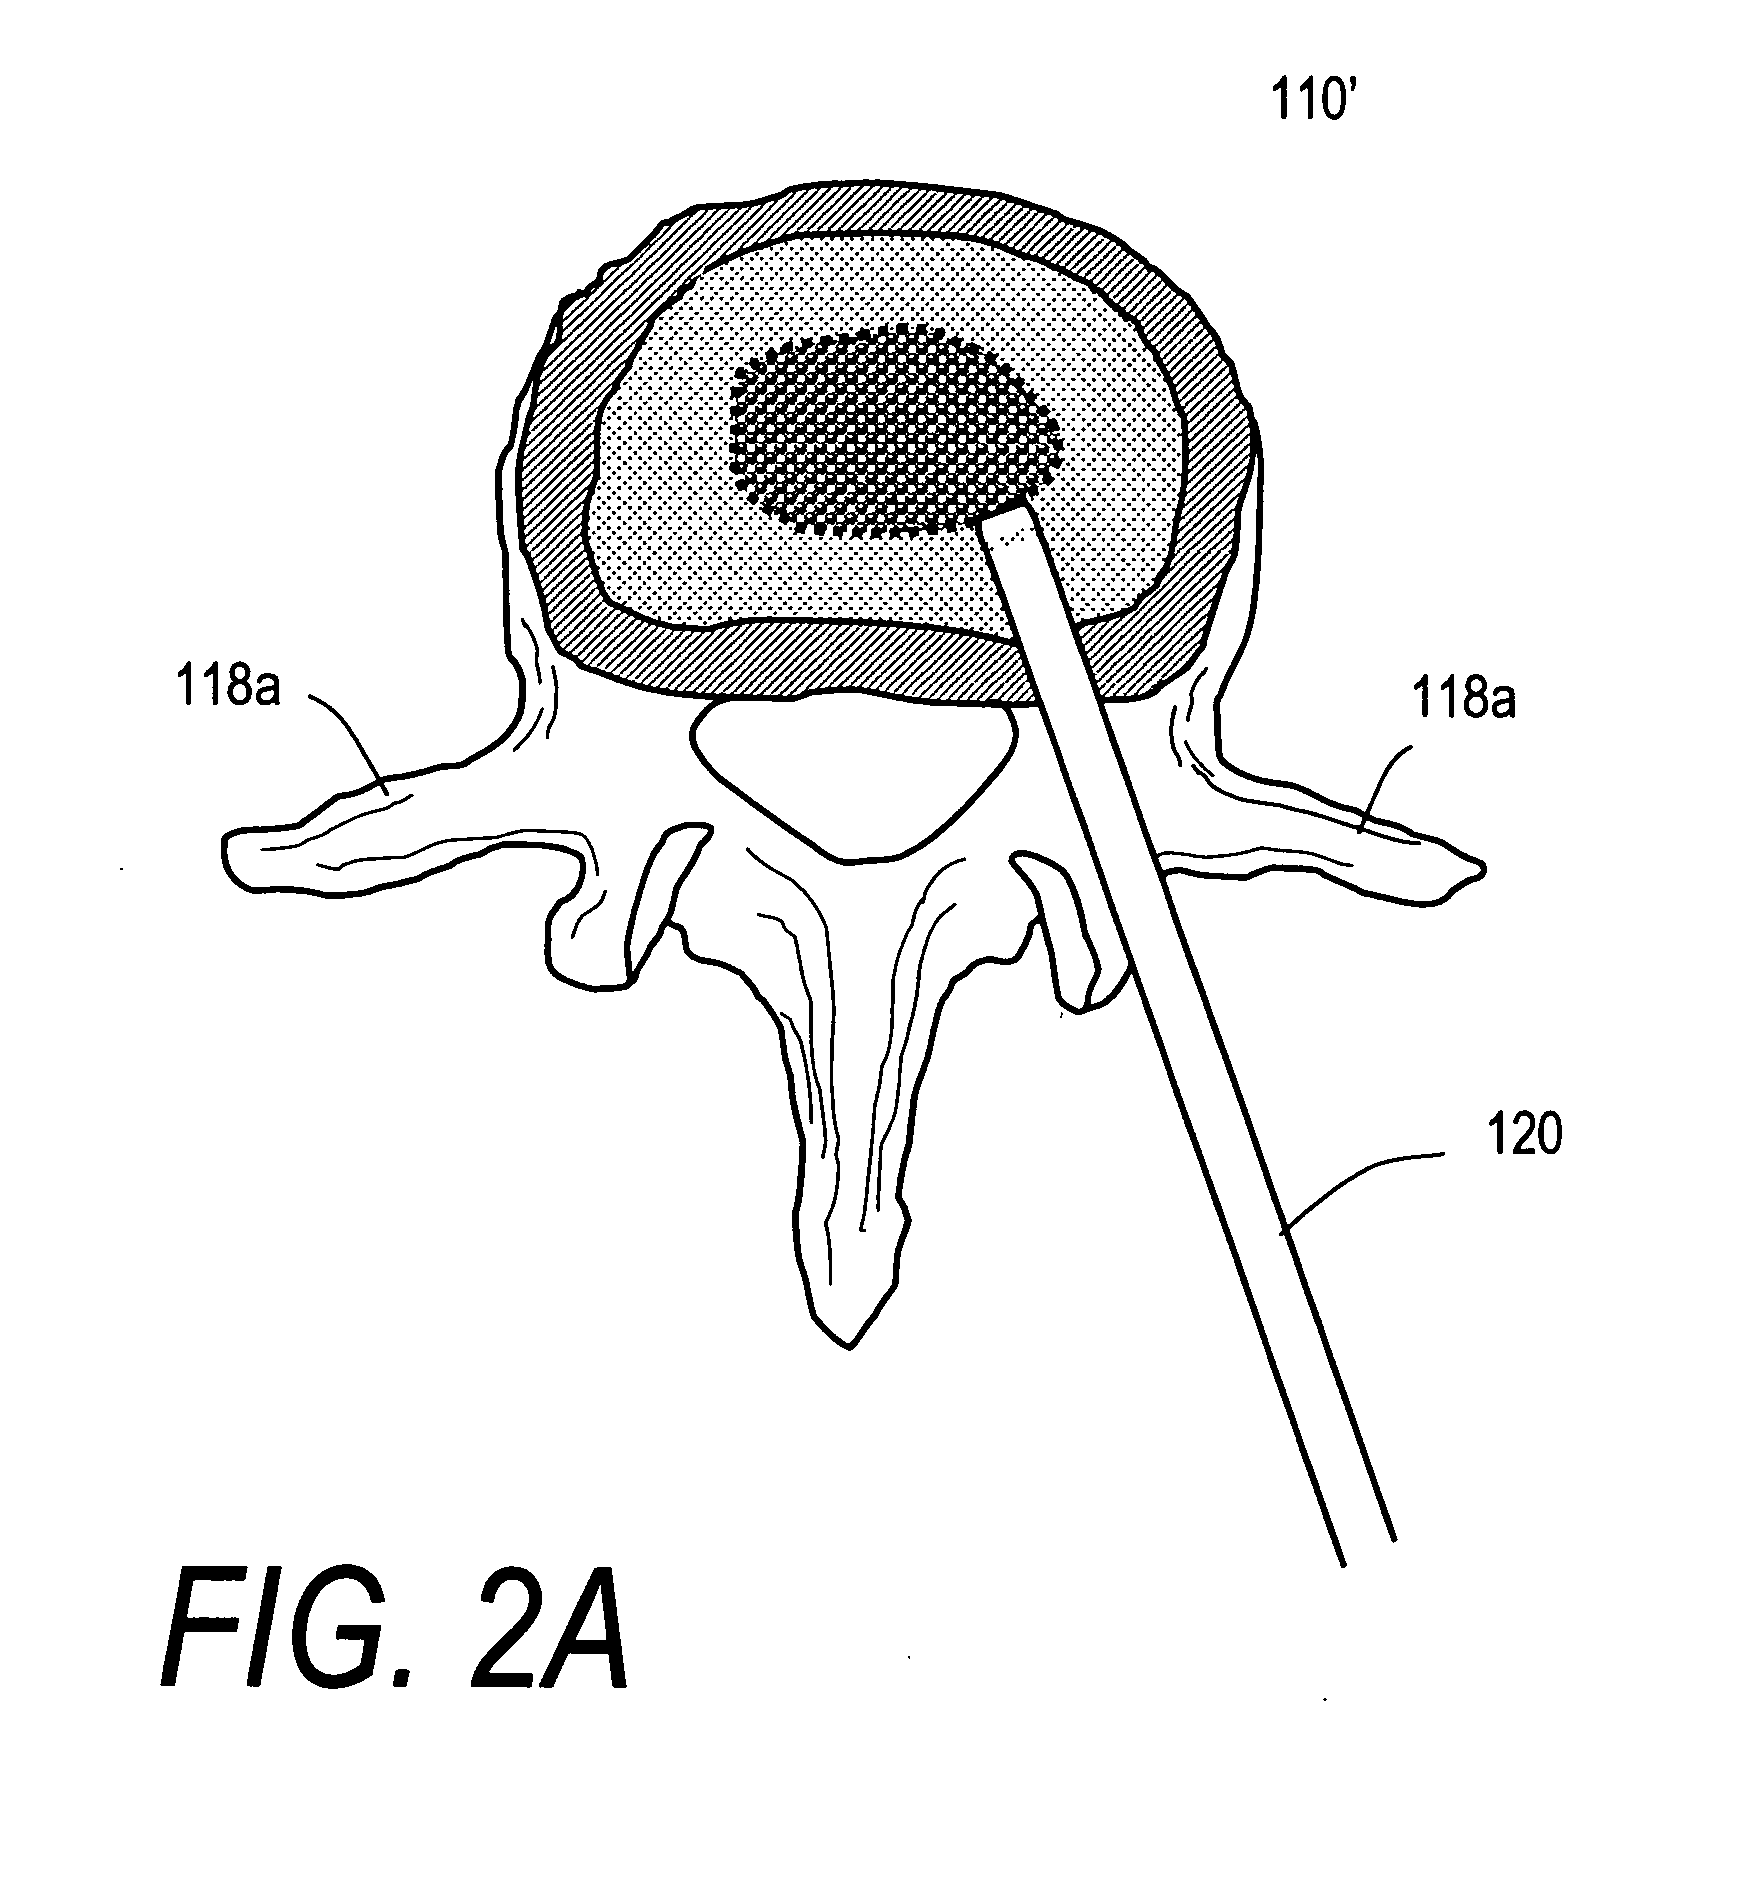 Biomedical treatment systems and methods